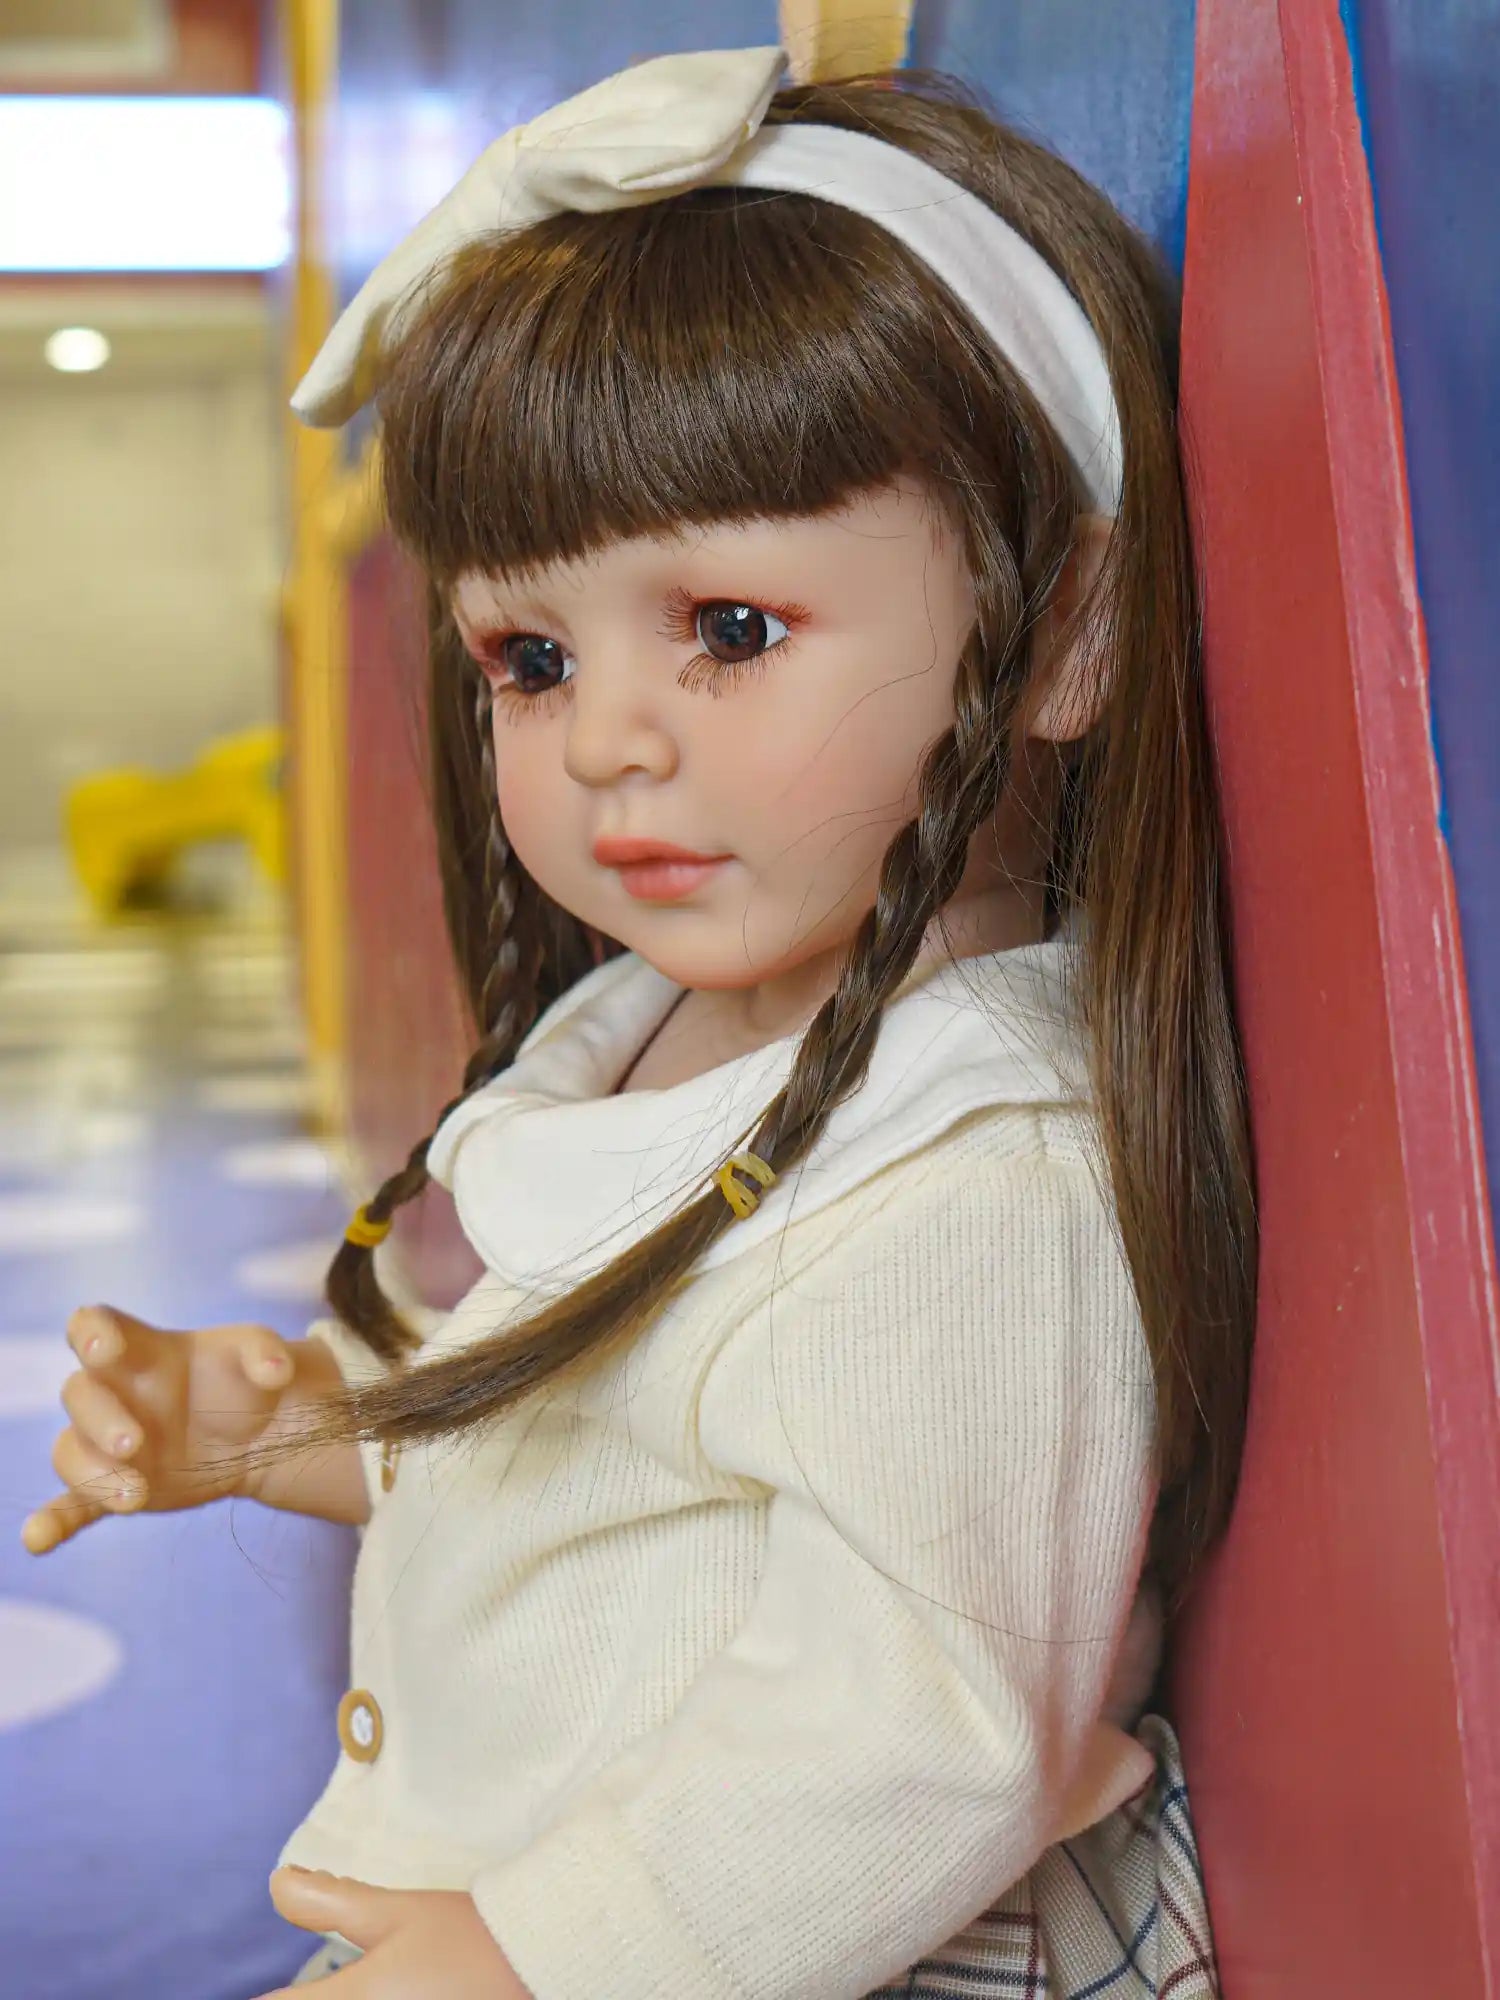 Doll with delicate facial features, wearing a white knitted sweater and a tartan skirt, seated on a shiny floor.